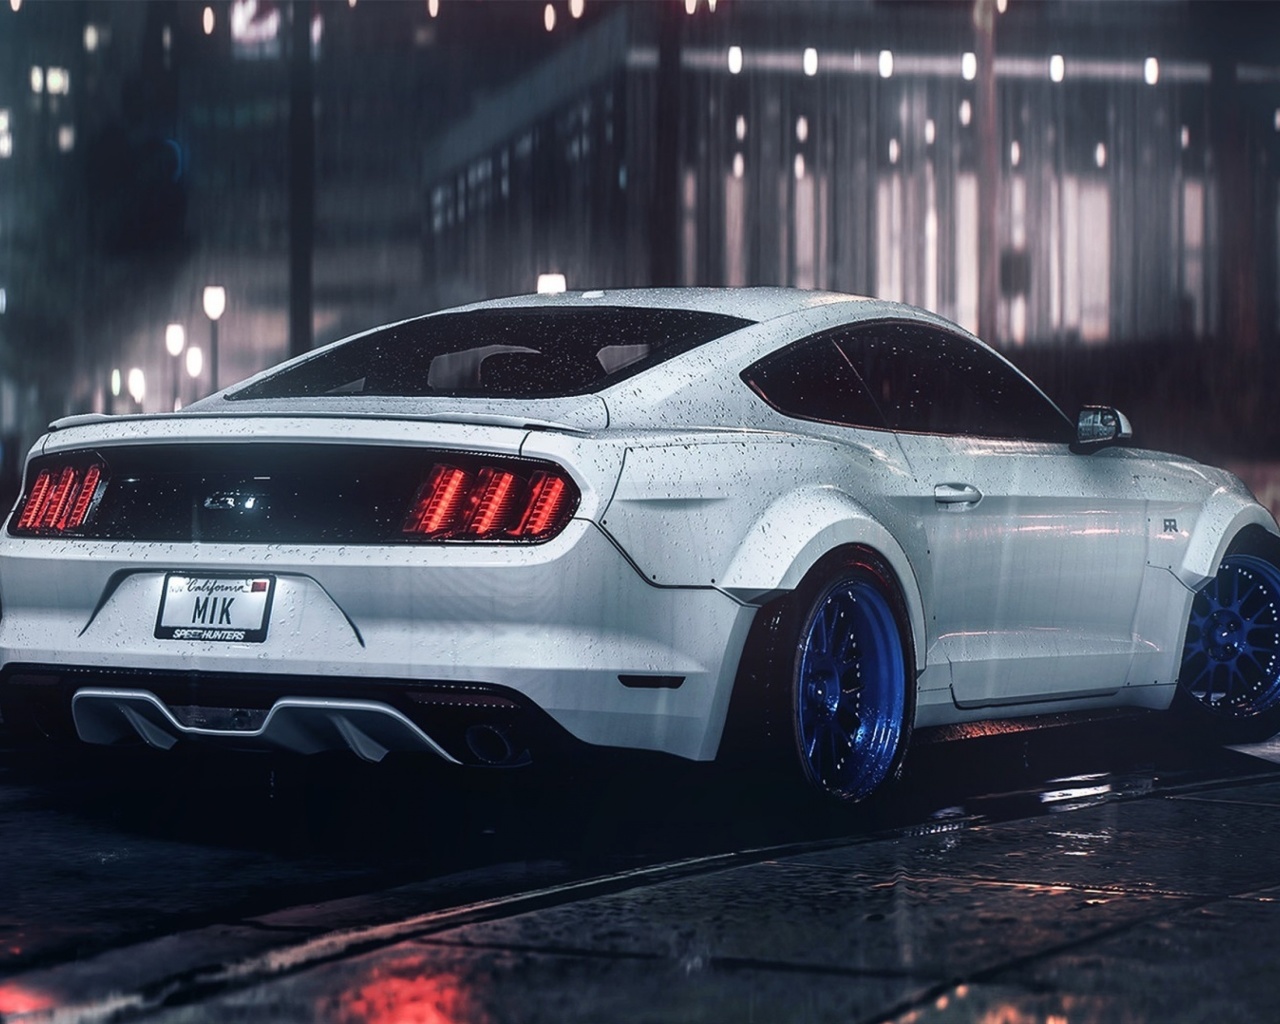 Ford Mustang Shelby GT350 wallpaper 1280x1024